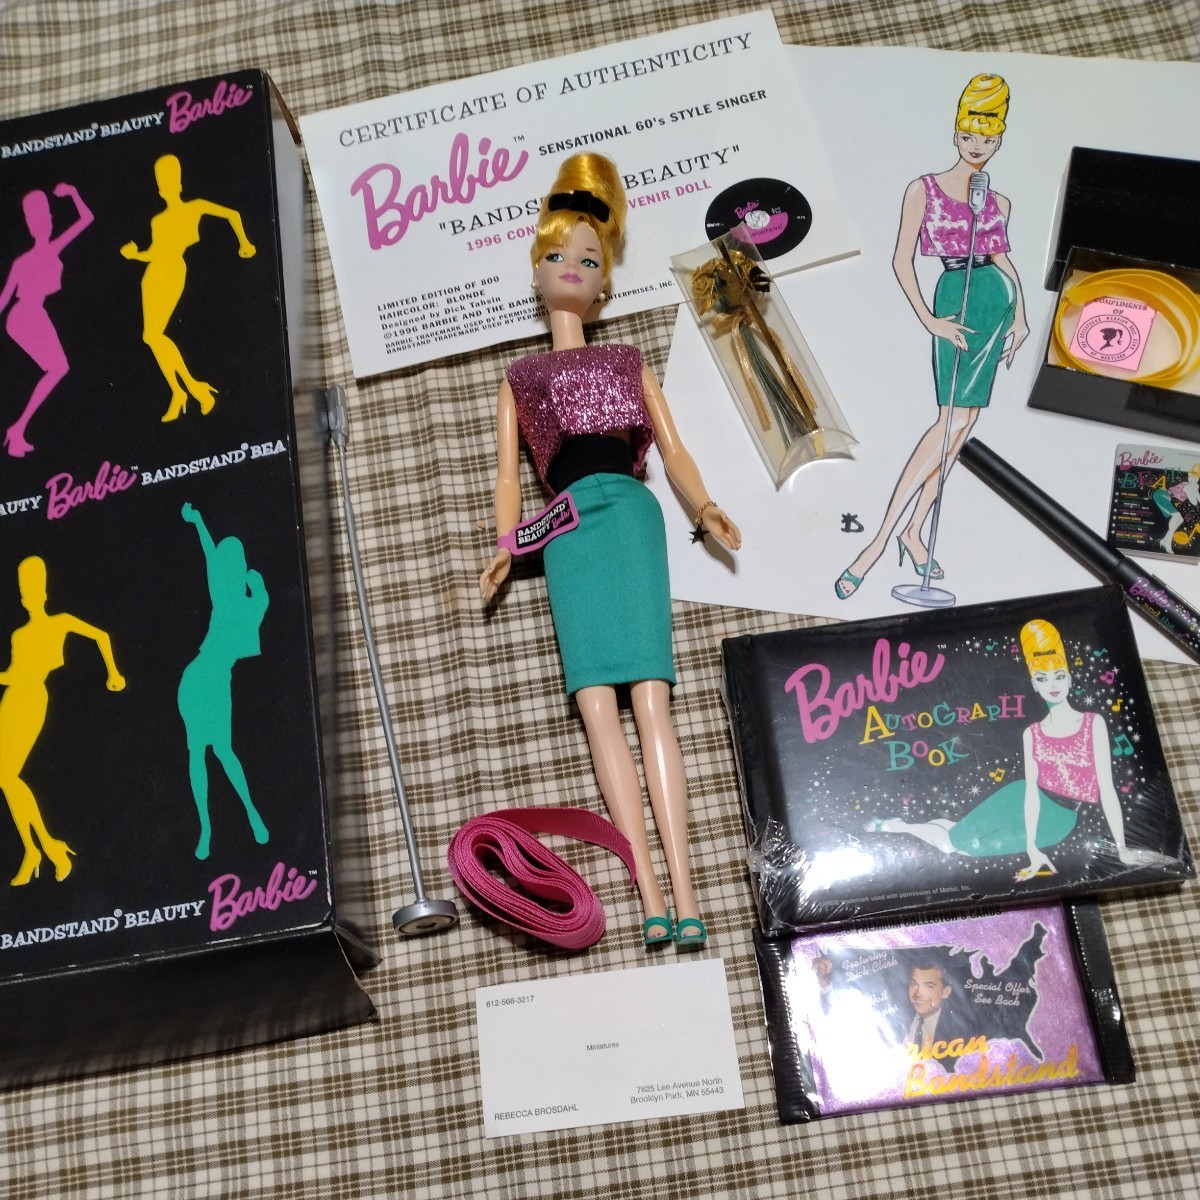  famous . navy blue Ben shonBarbie* band stand Barbie * box, small articles etc. accessory many 1996 year beautiful goods 